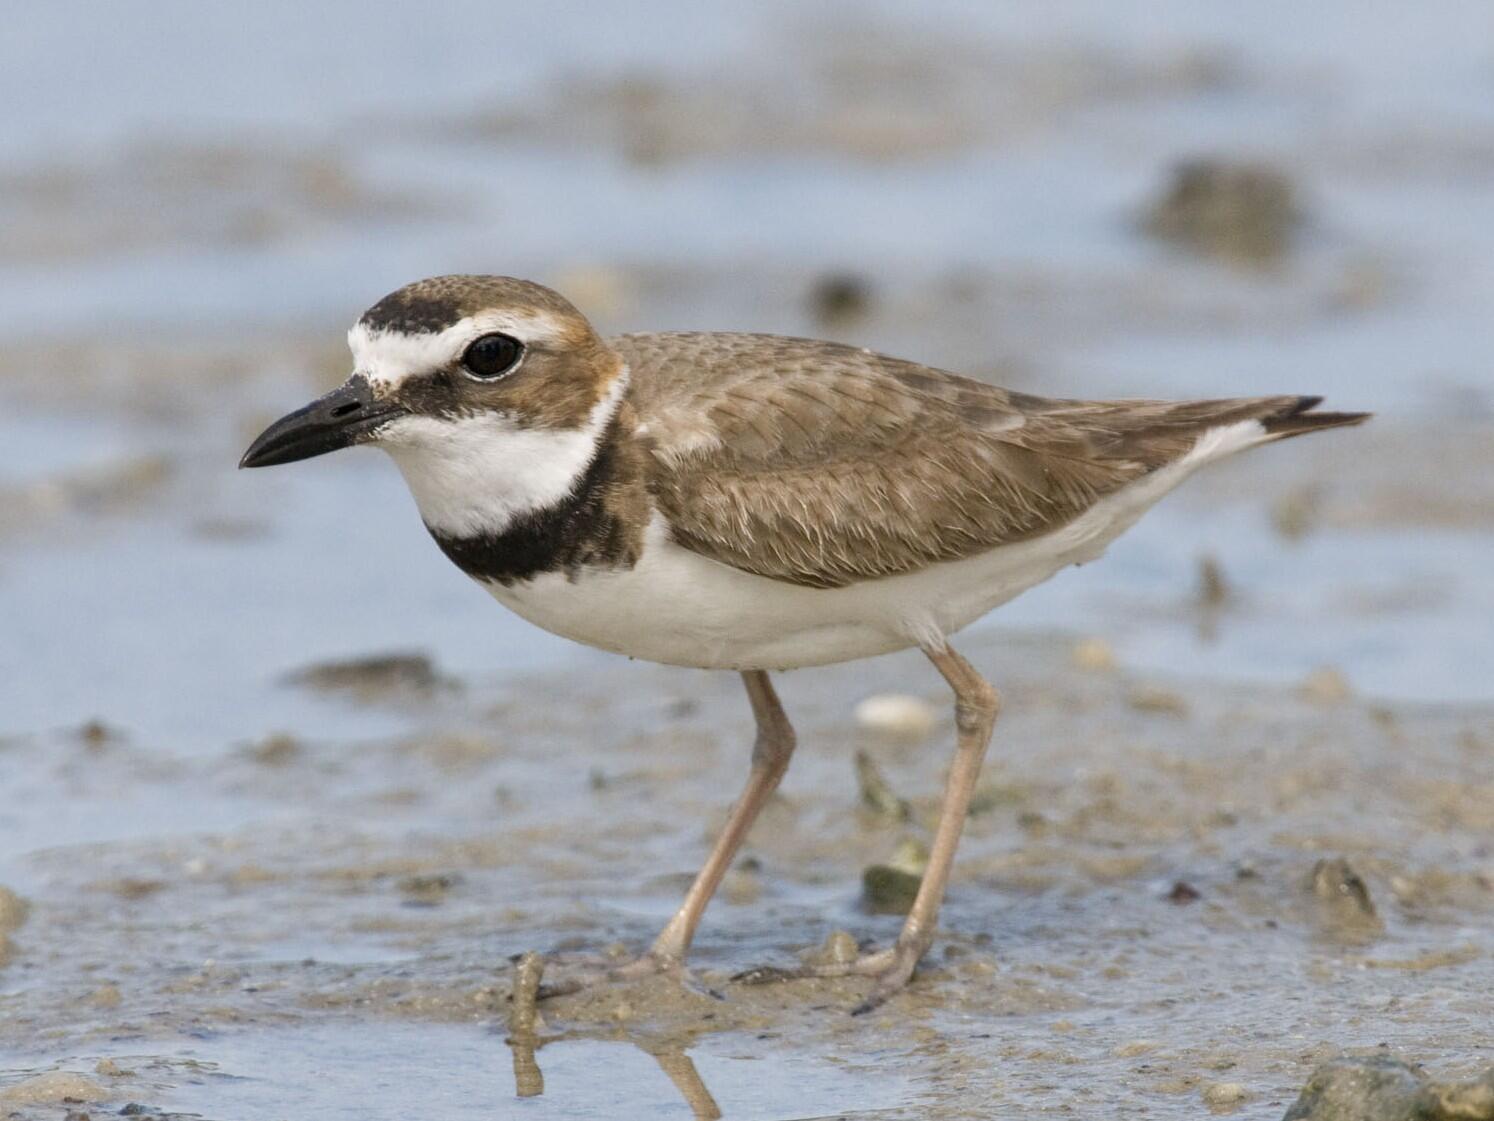 A Wilson's Plover stands on a sand and rock beach.